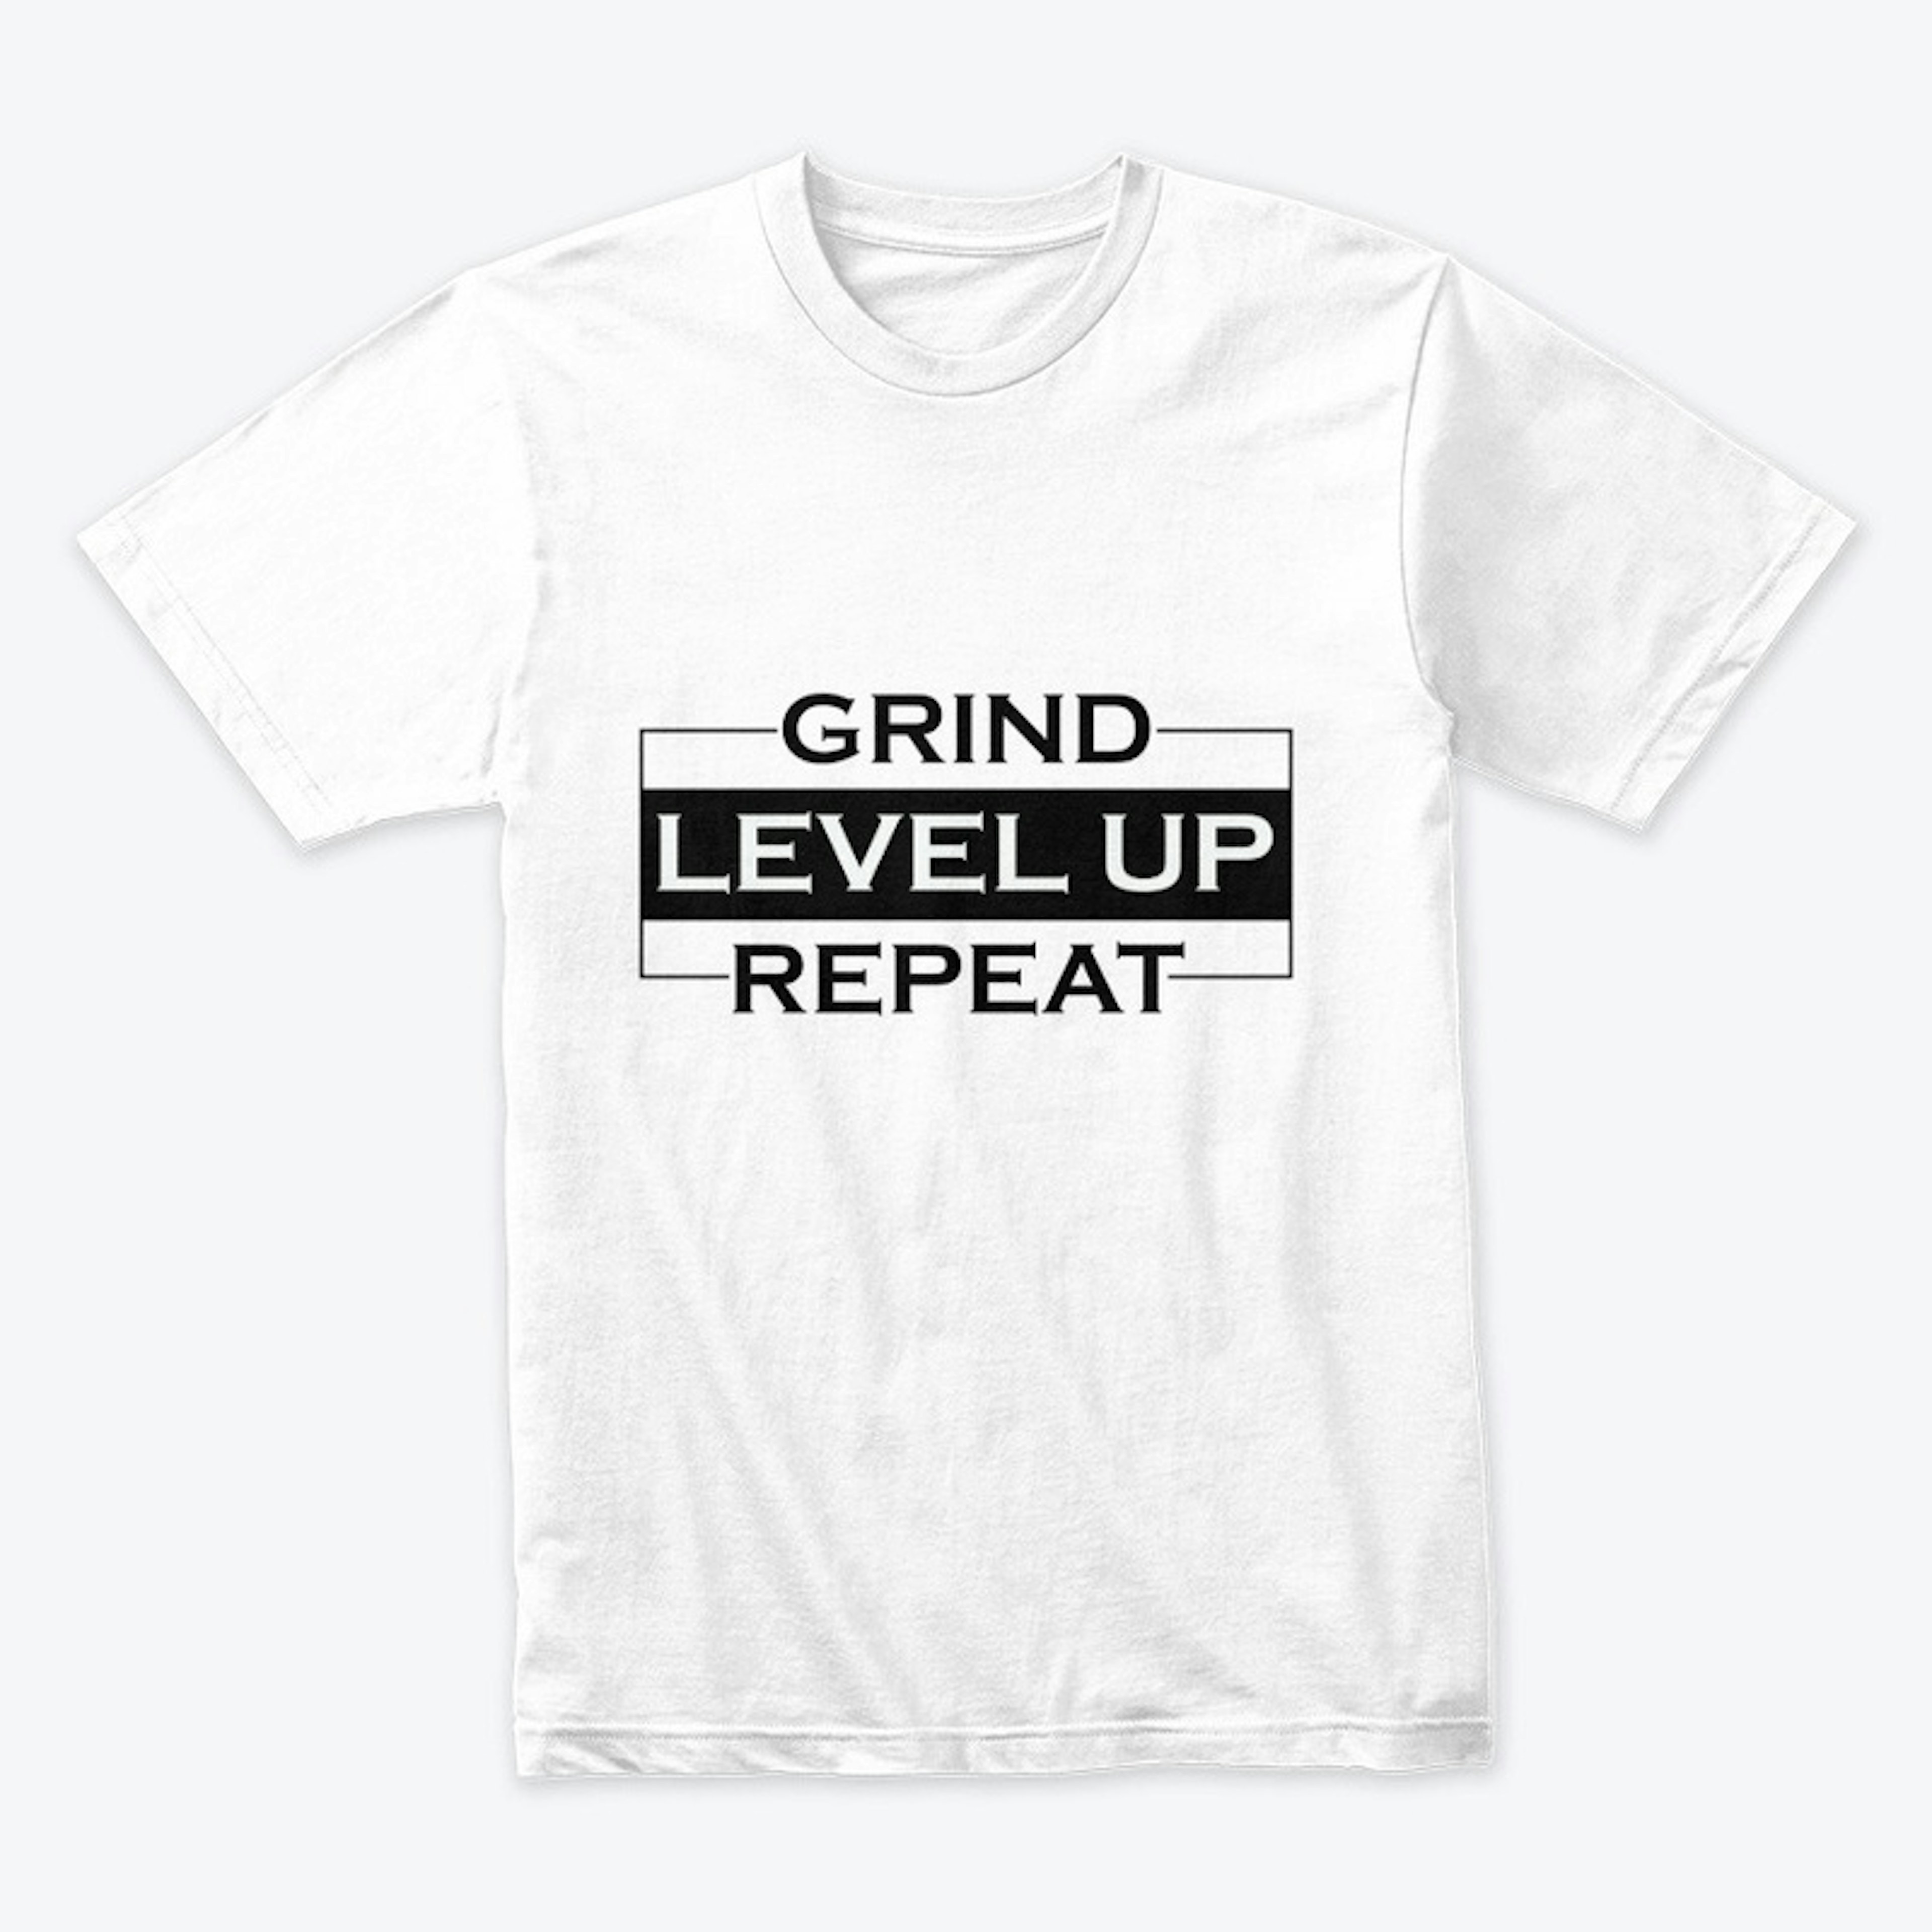 Grind - Level Up - Repeat